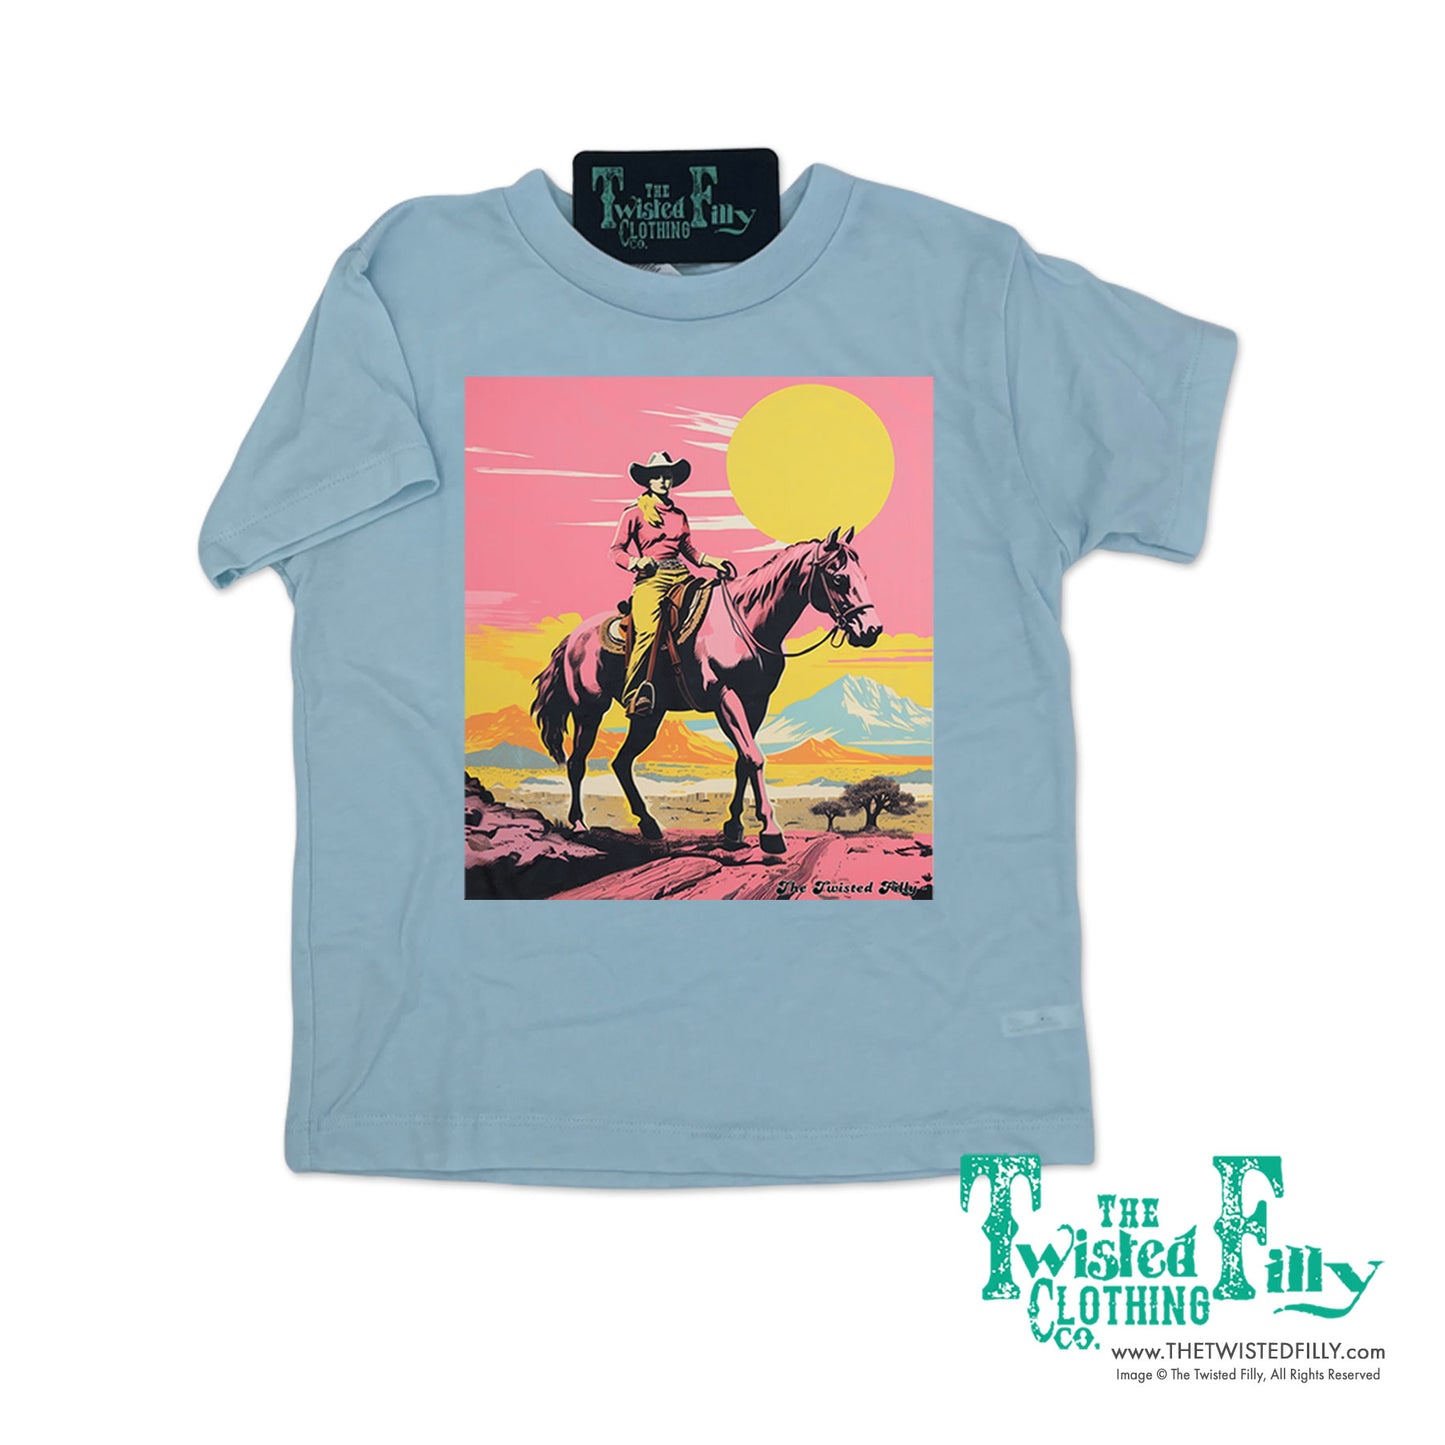 Desert Cowgirl- S/S Girls Youth Tee - Assorted Colors